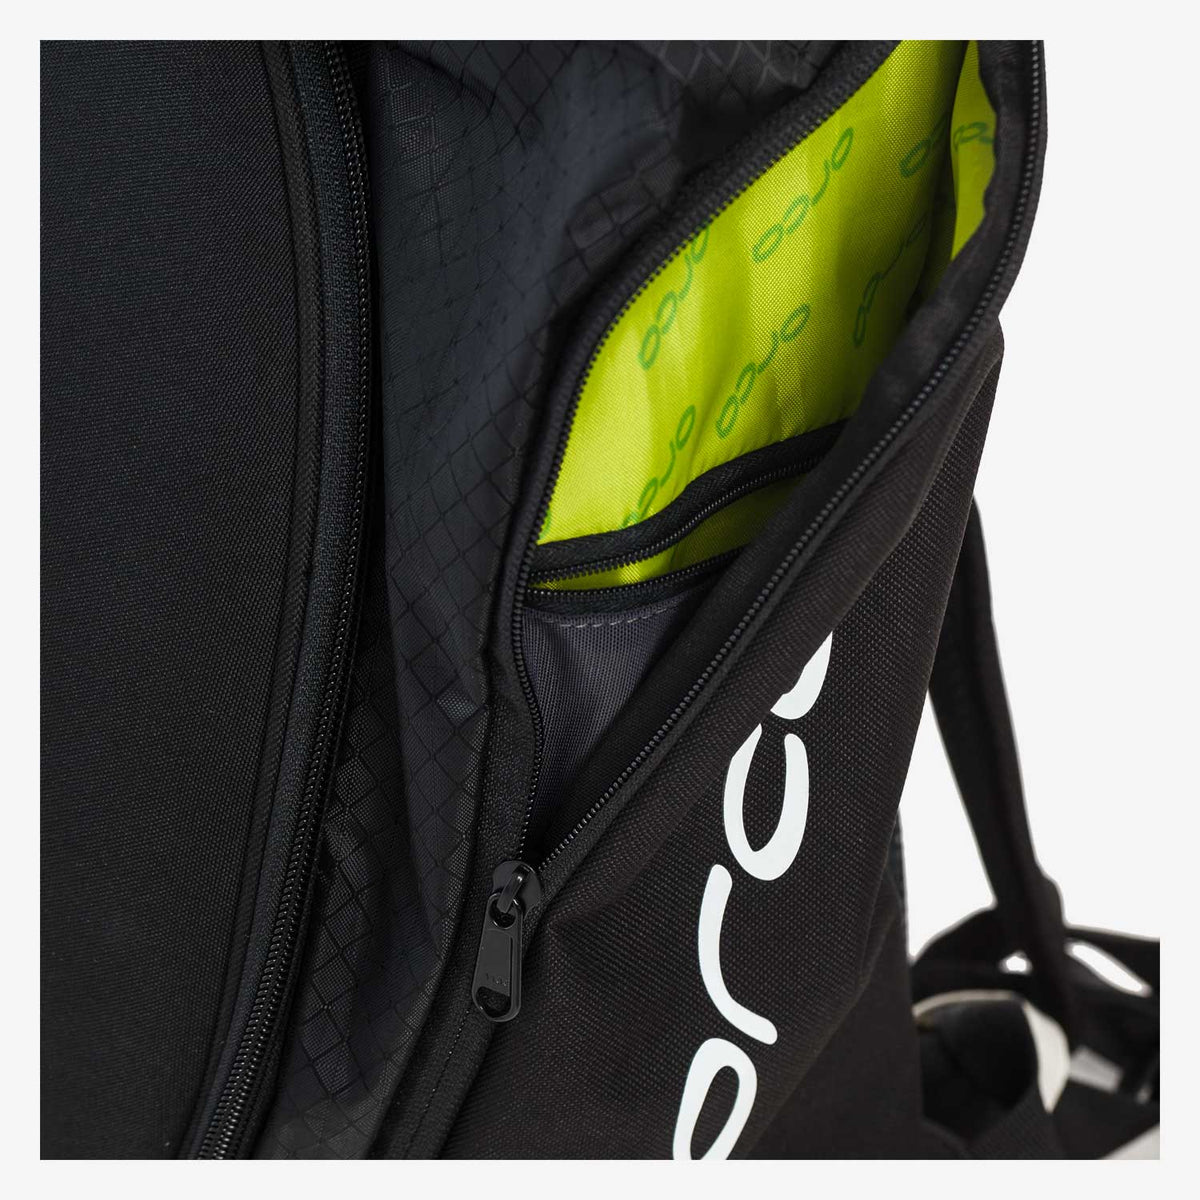 ORCA TRANSITION BACKPACK